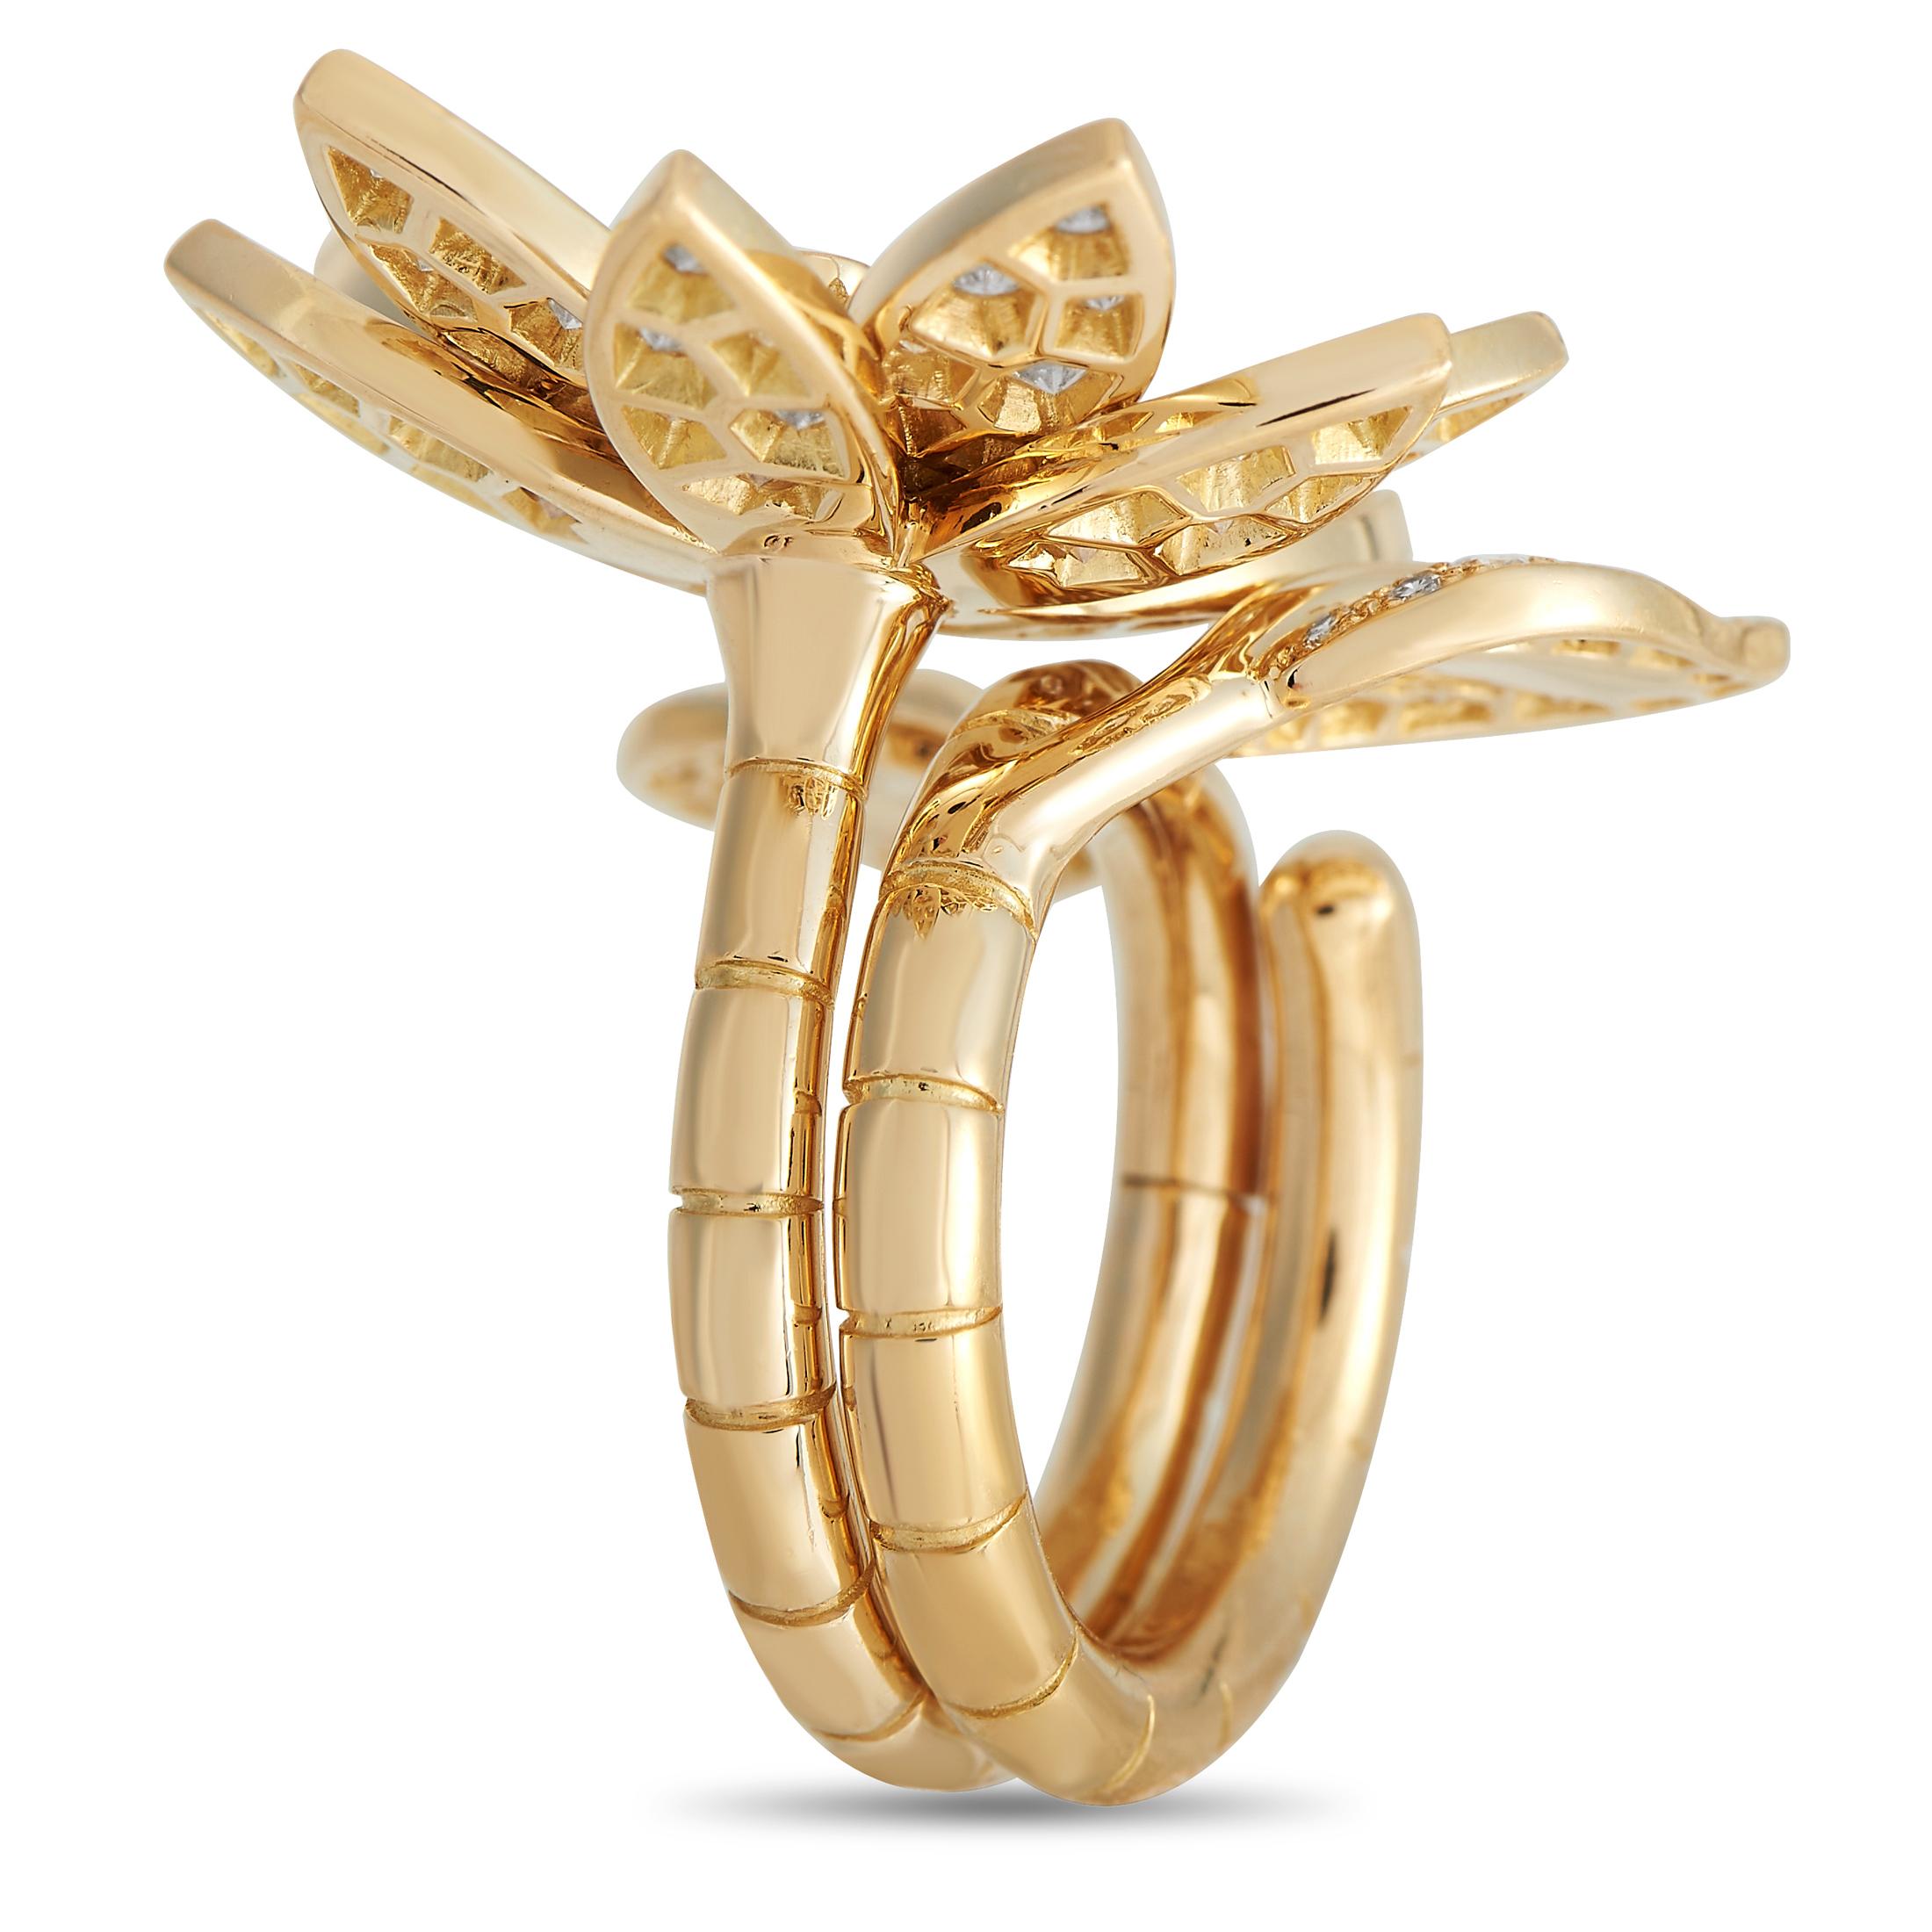 Unique and utterly beautiful, this Van Cleef & Arpels ring is worthy of a spot in your ring collection. It features a solid 18K yellow-gold band that has a coiled silhouette and a hinged portion. The band can be worn two ways: as a double-loop ring